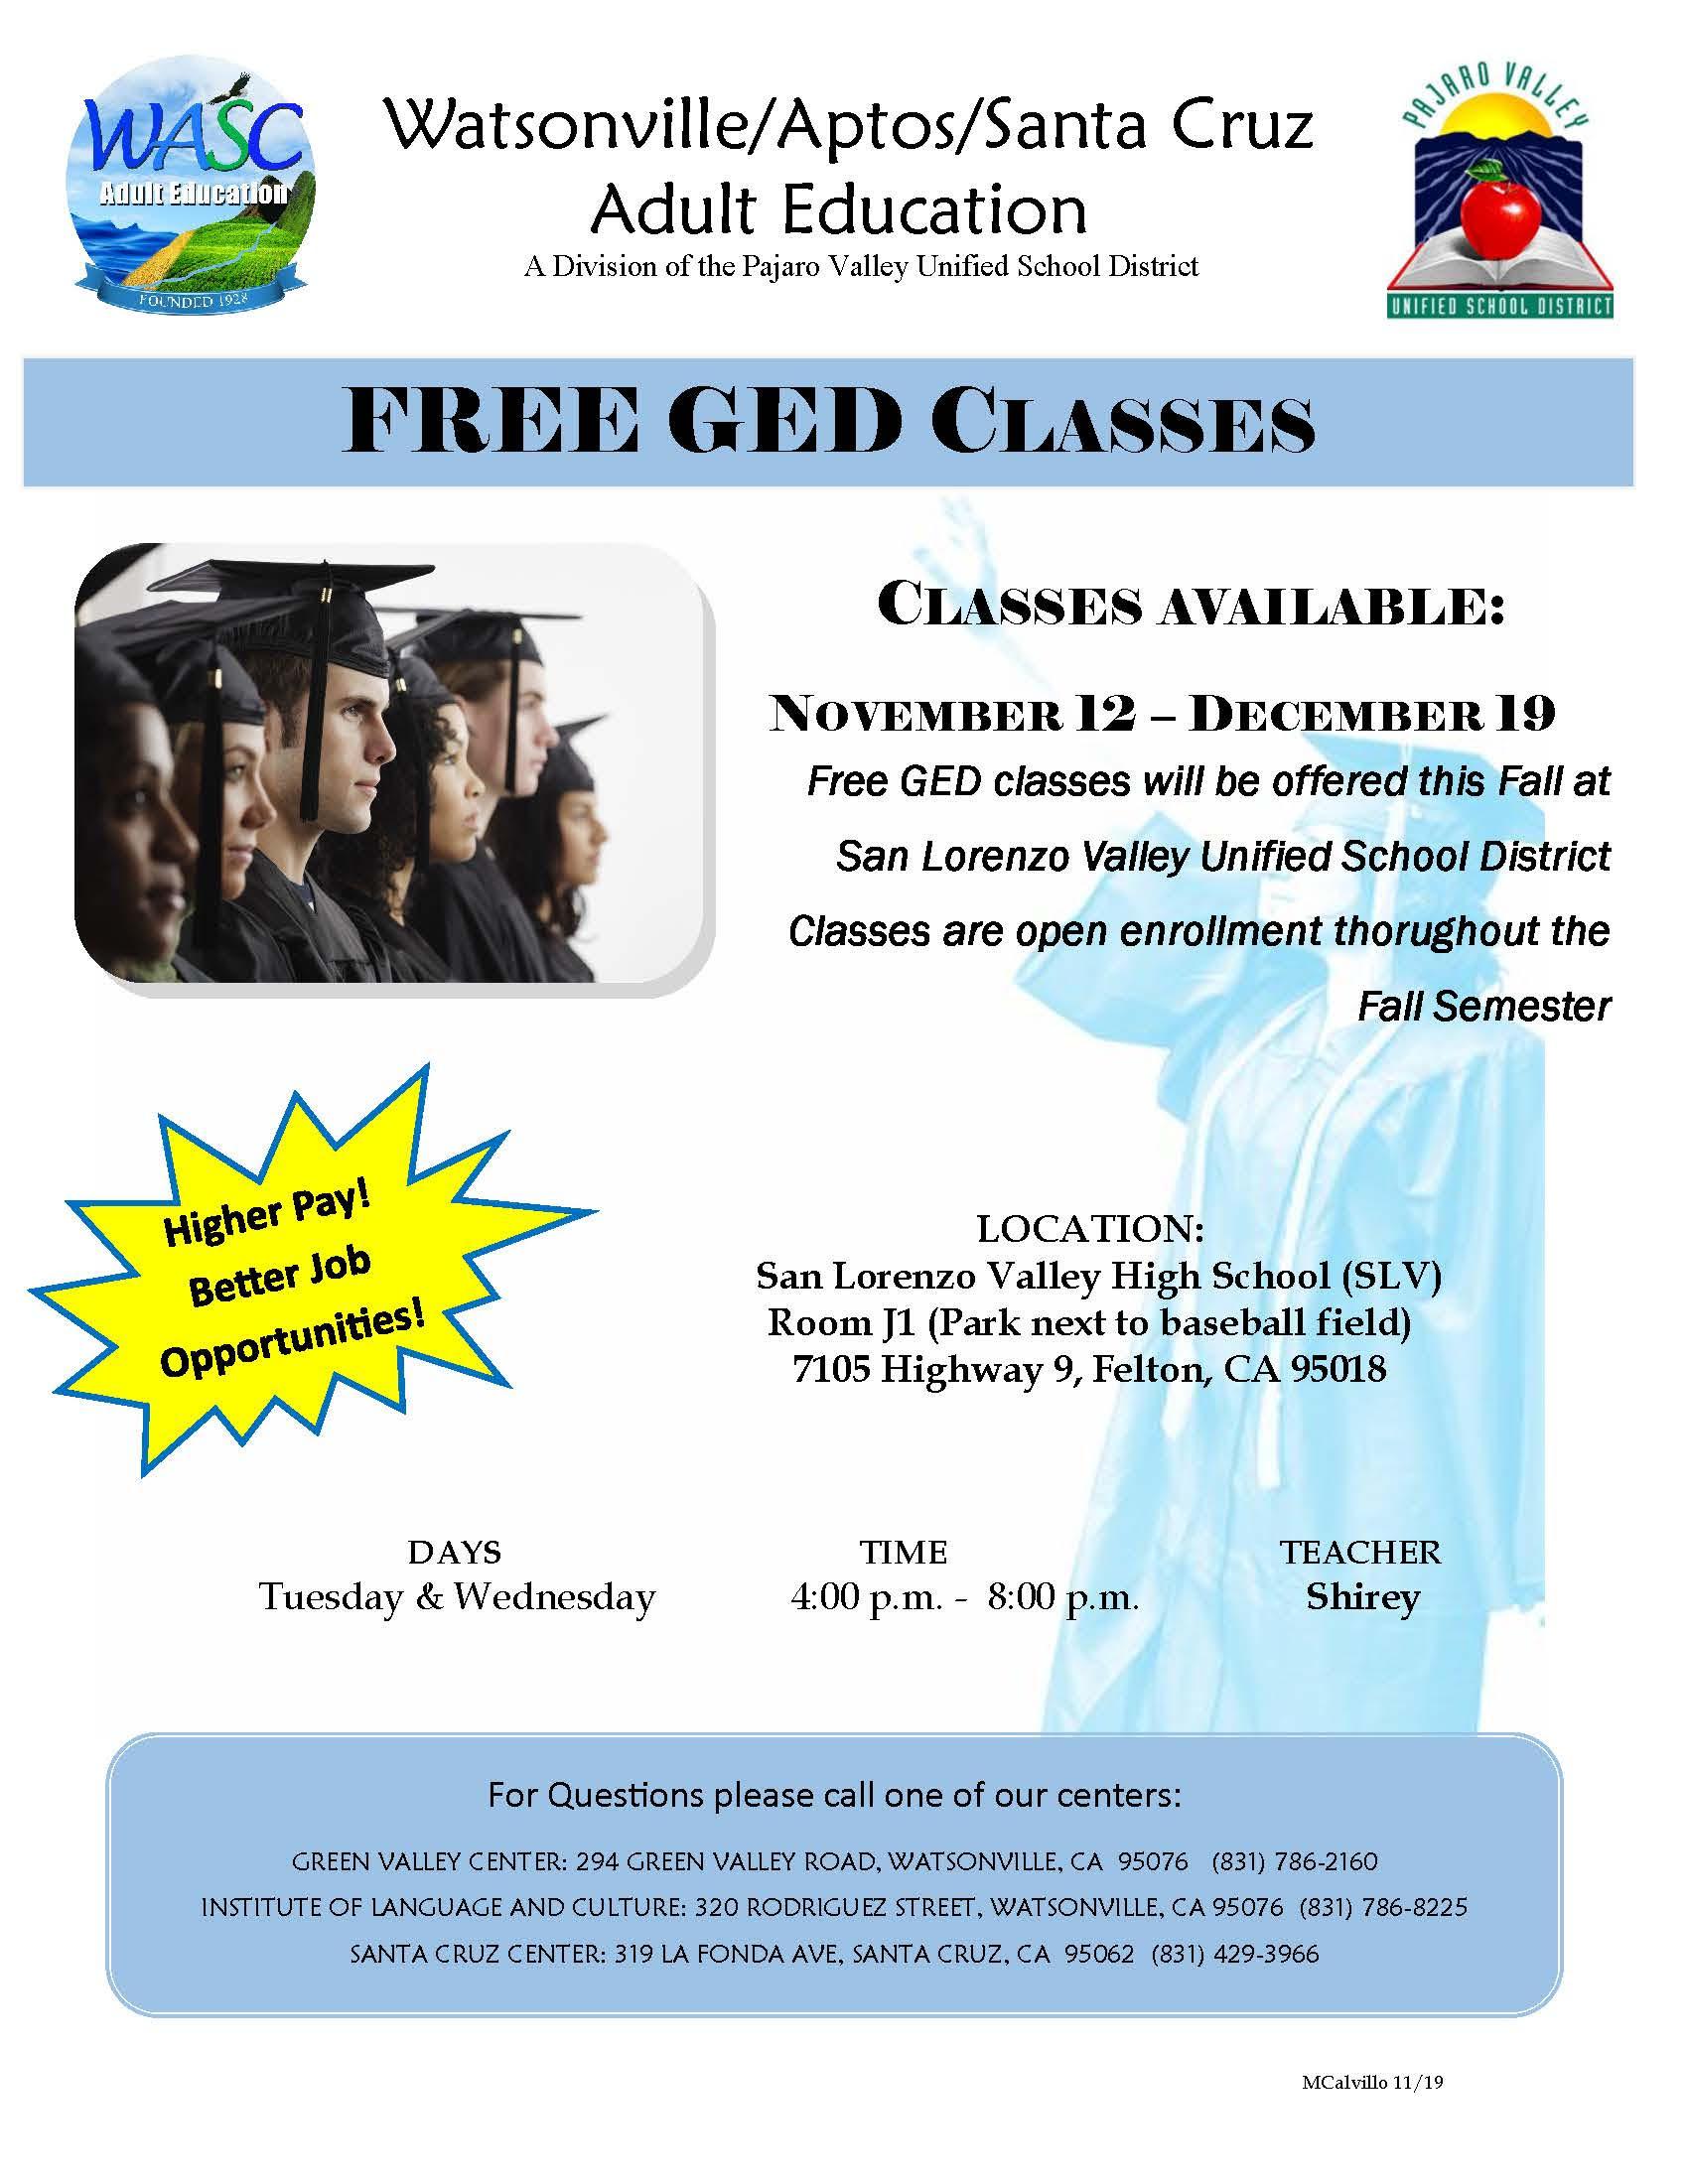 free ged classes; call 831-786-2160 for information